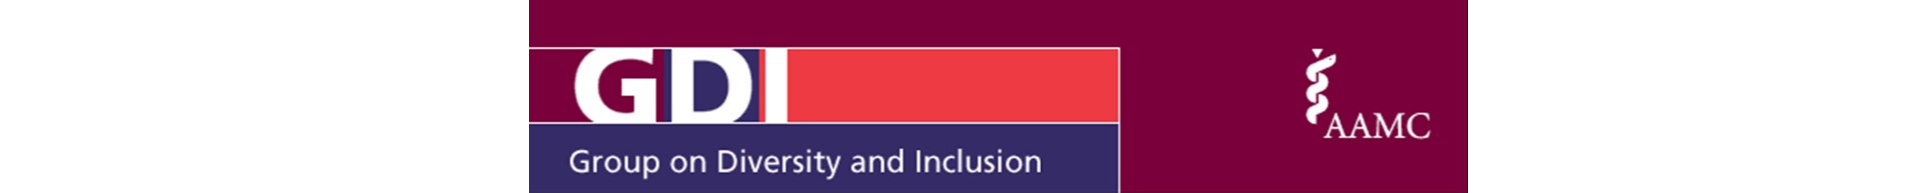 Diversity and Inclusion (GDI) Call for Nominations Event Banner